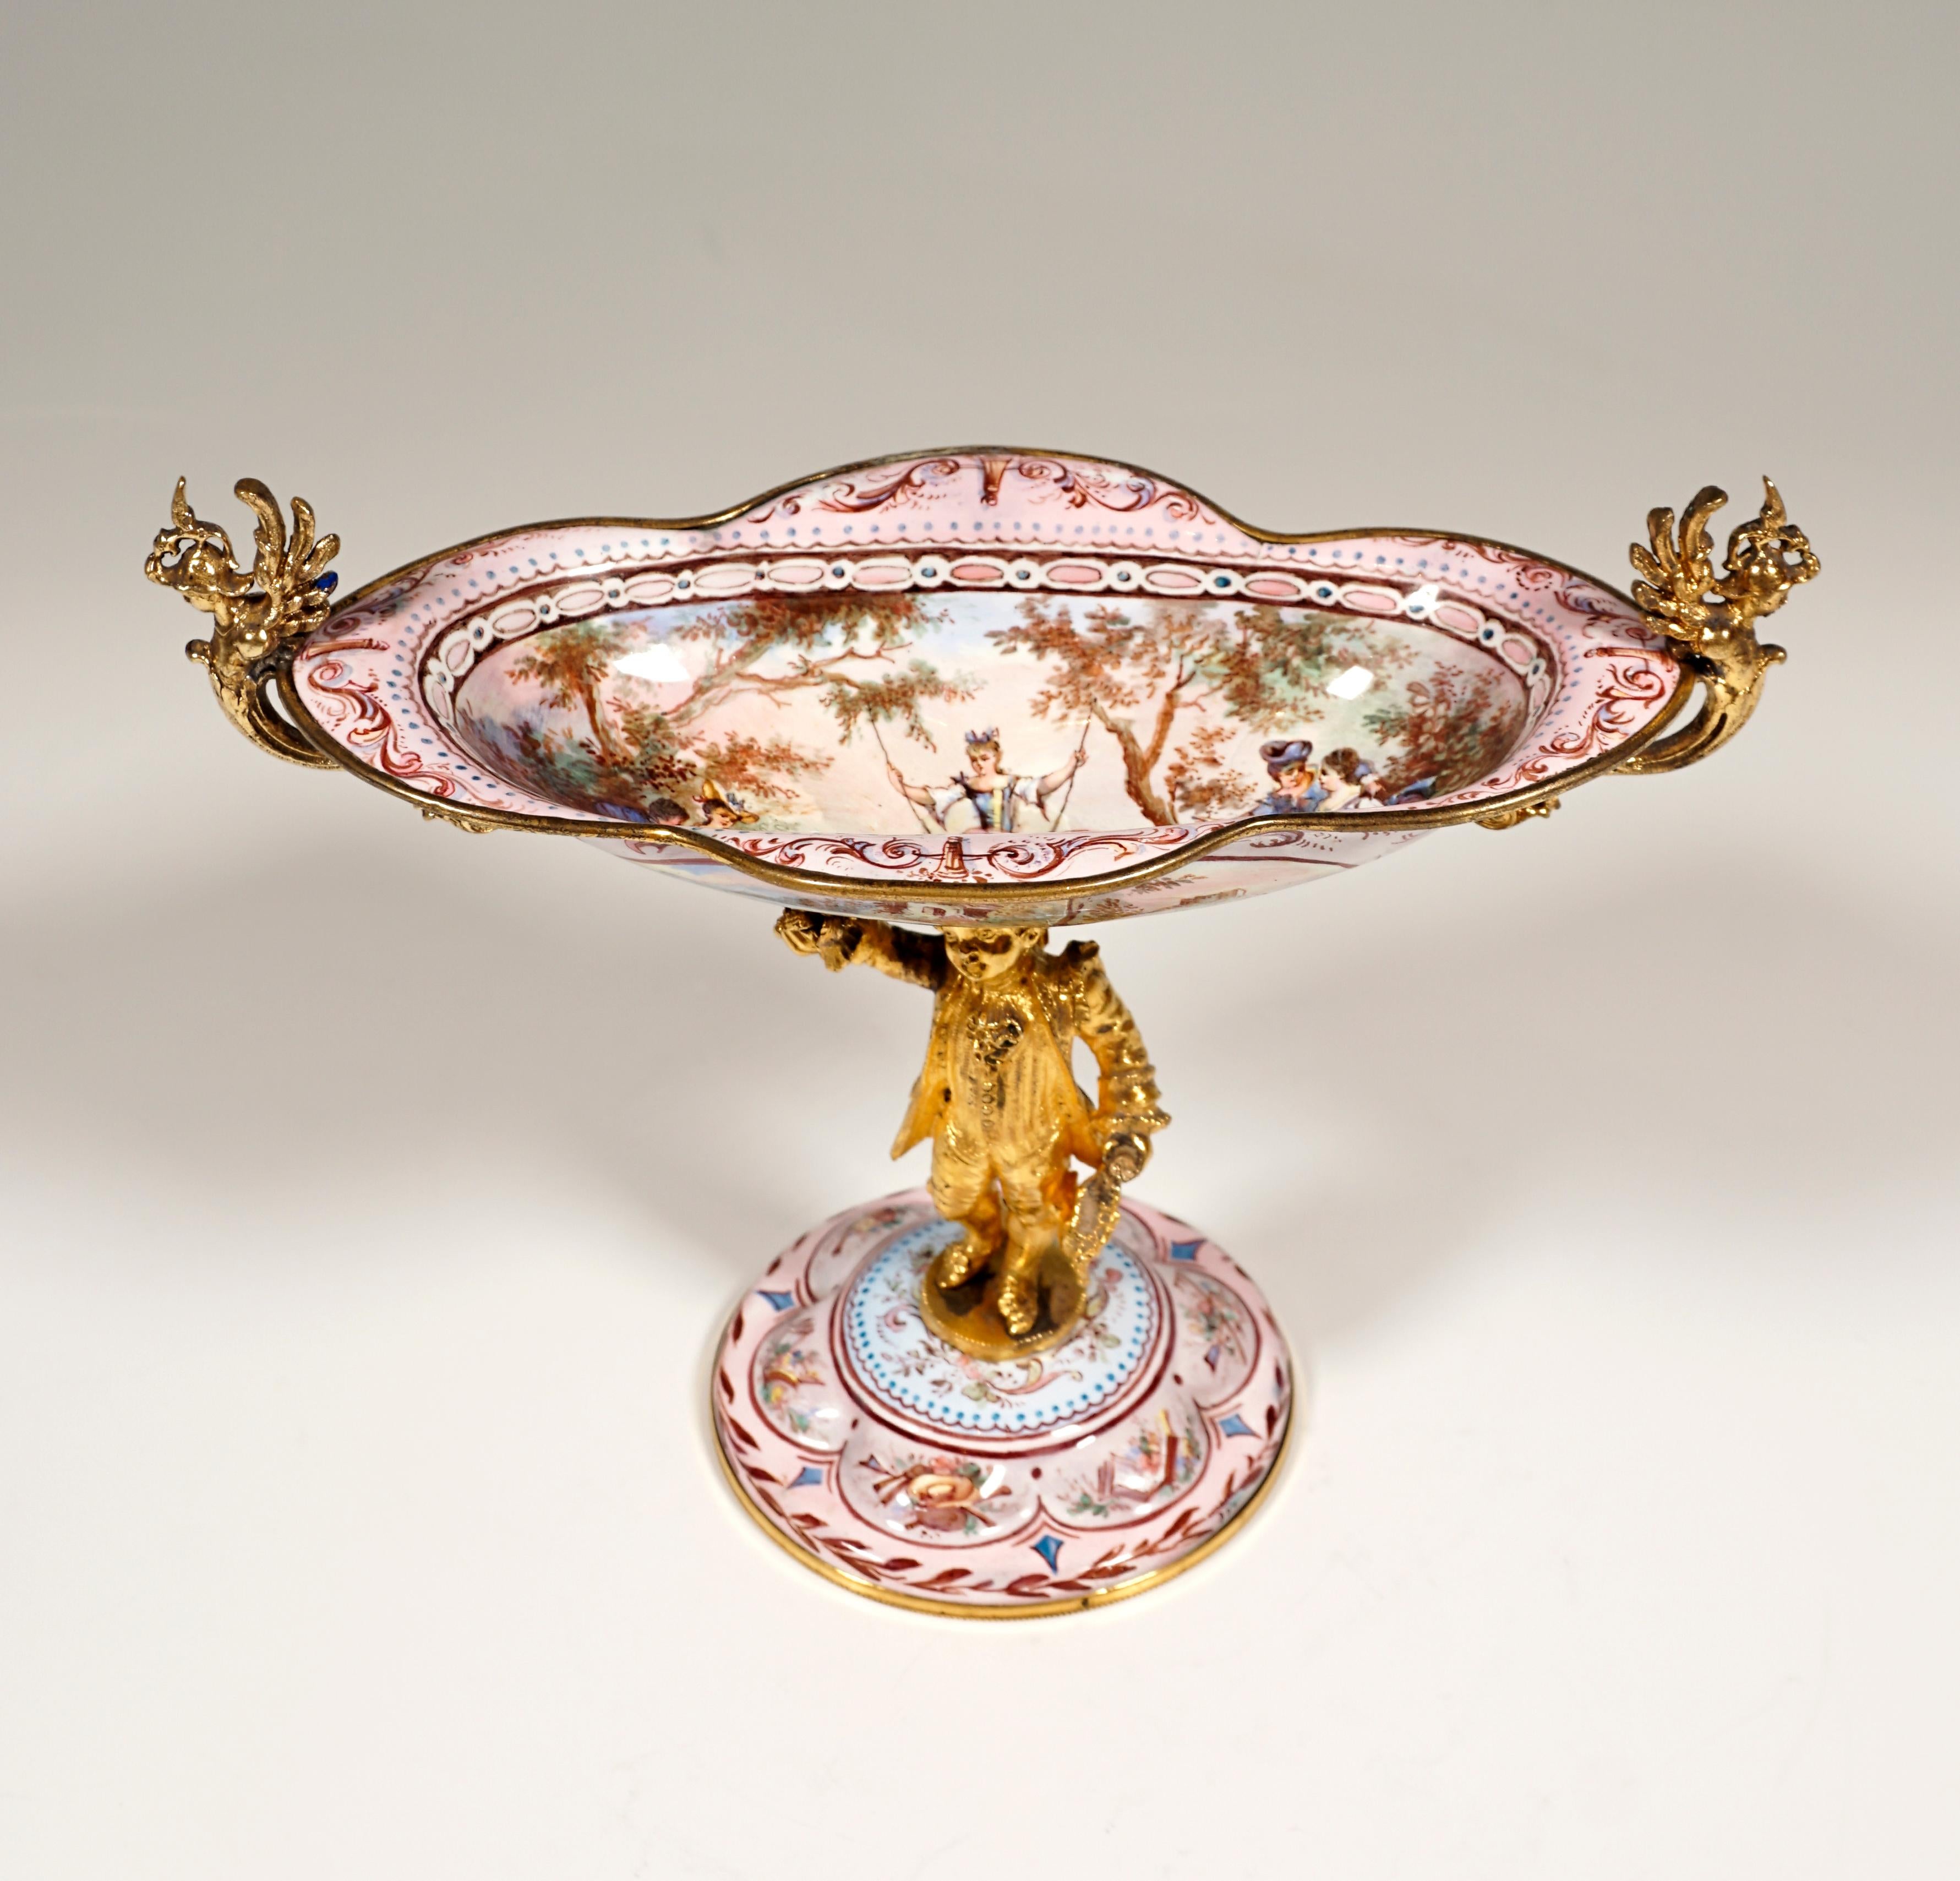 Finest Viennese Enamel Work from around 1880:
Fire-gilded bronze, elongated oval bowl and arched foot painted with colored enamel with Watteau scenes and richly detailed arabesque decoration, a three-dimensional, fire-gilded rococo boy with a wig